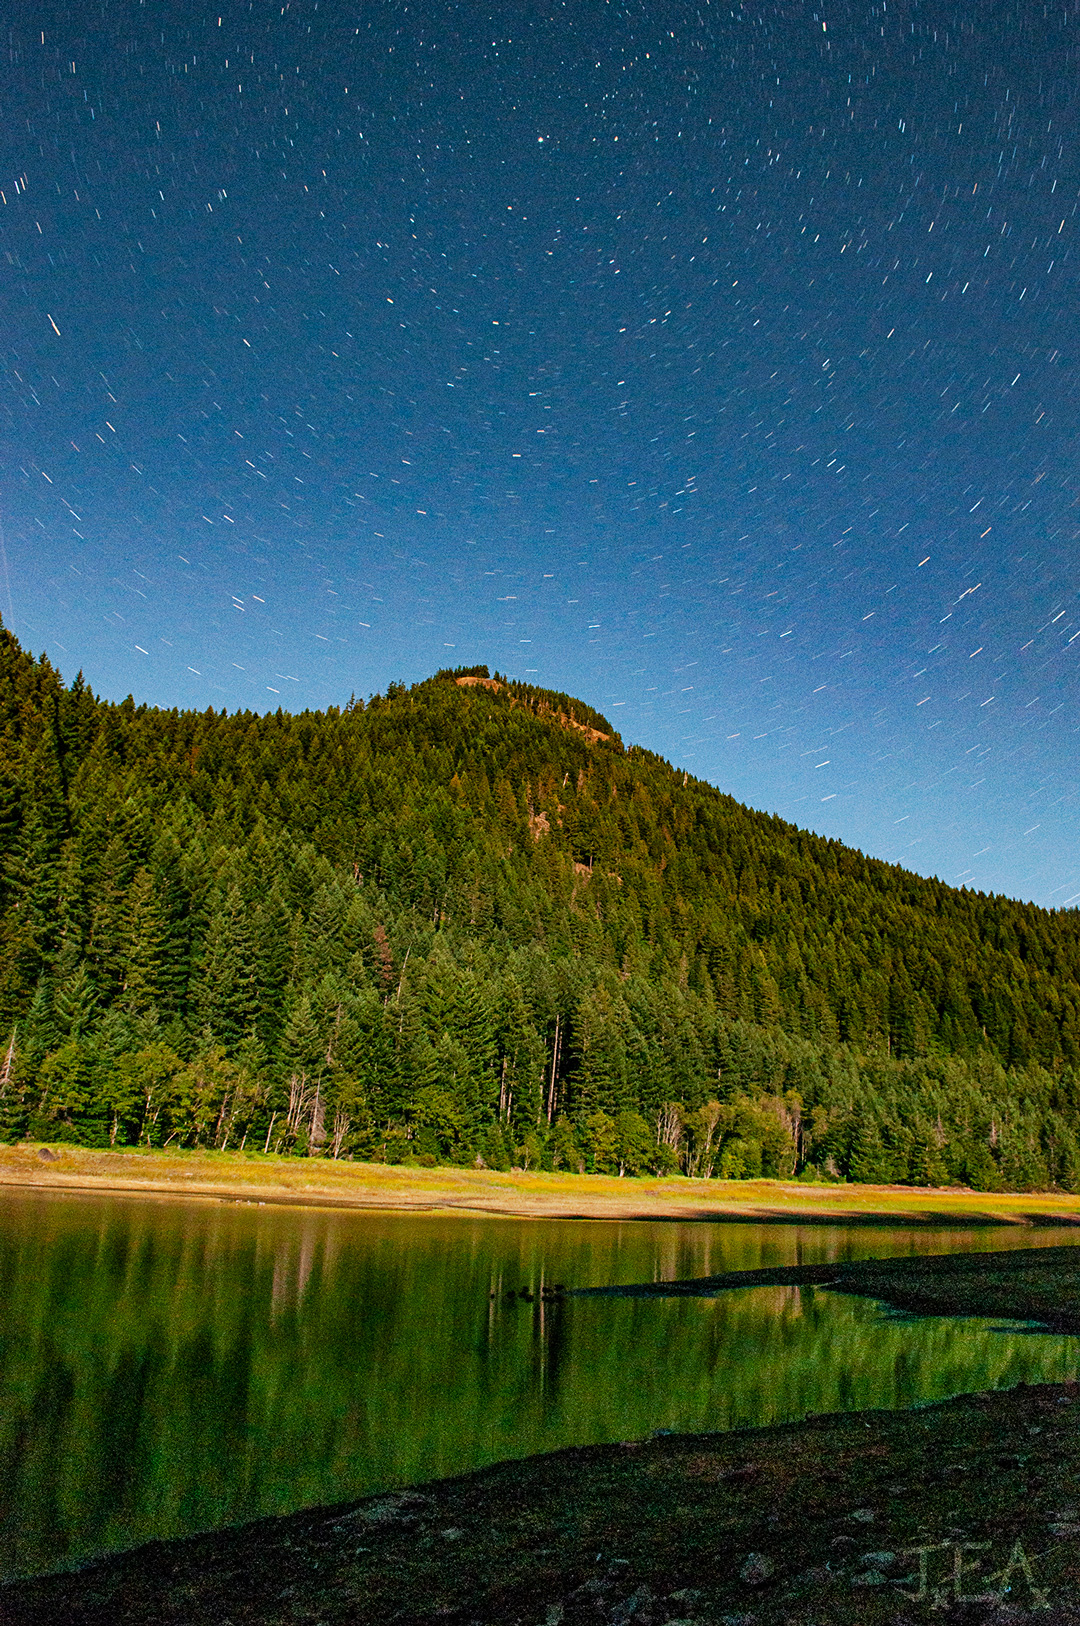 The stars shine above a forested mountain with a river flowing in front of it.